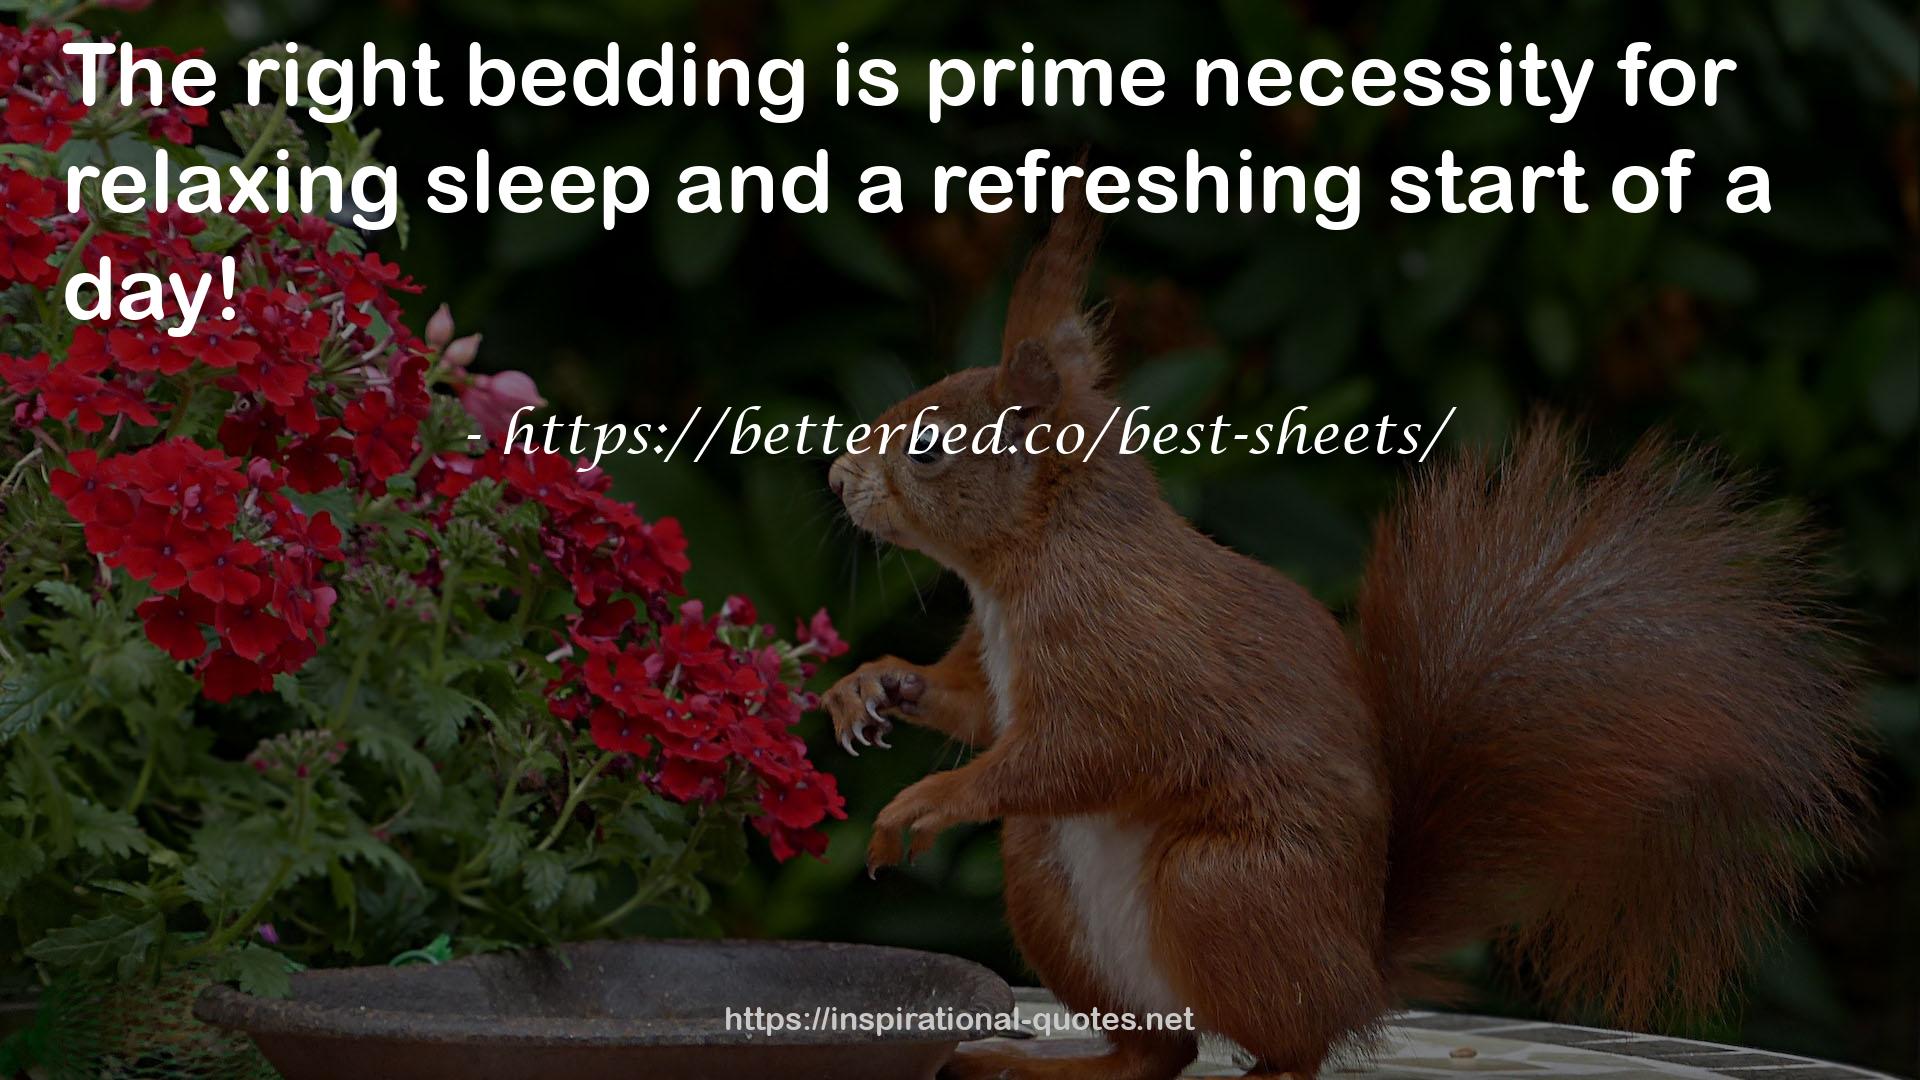 https://betterbed.co/best-sheets/ QUOTES